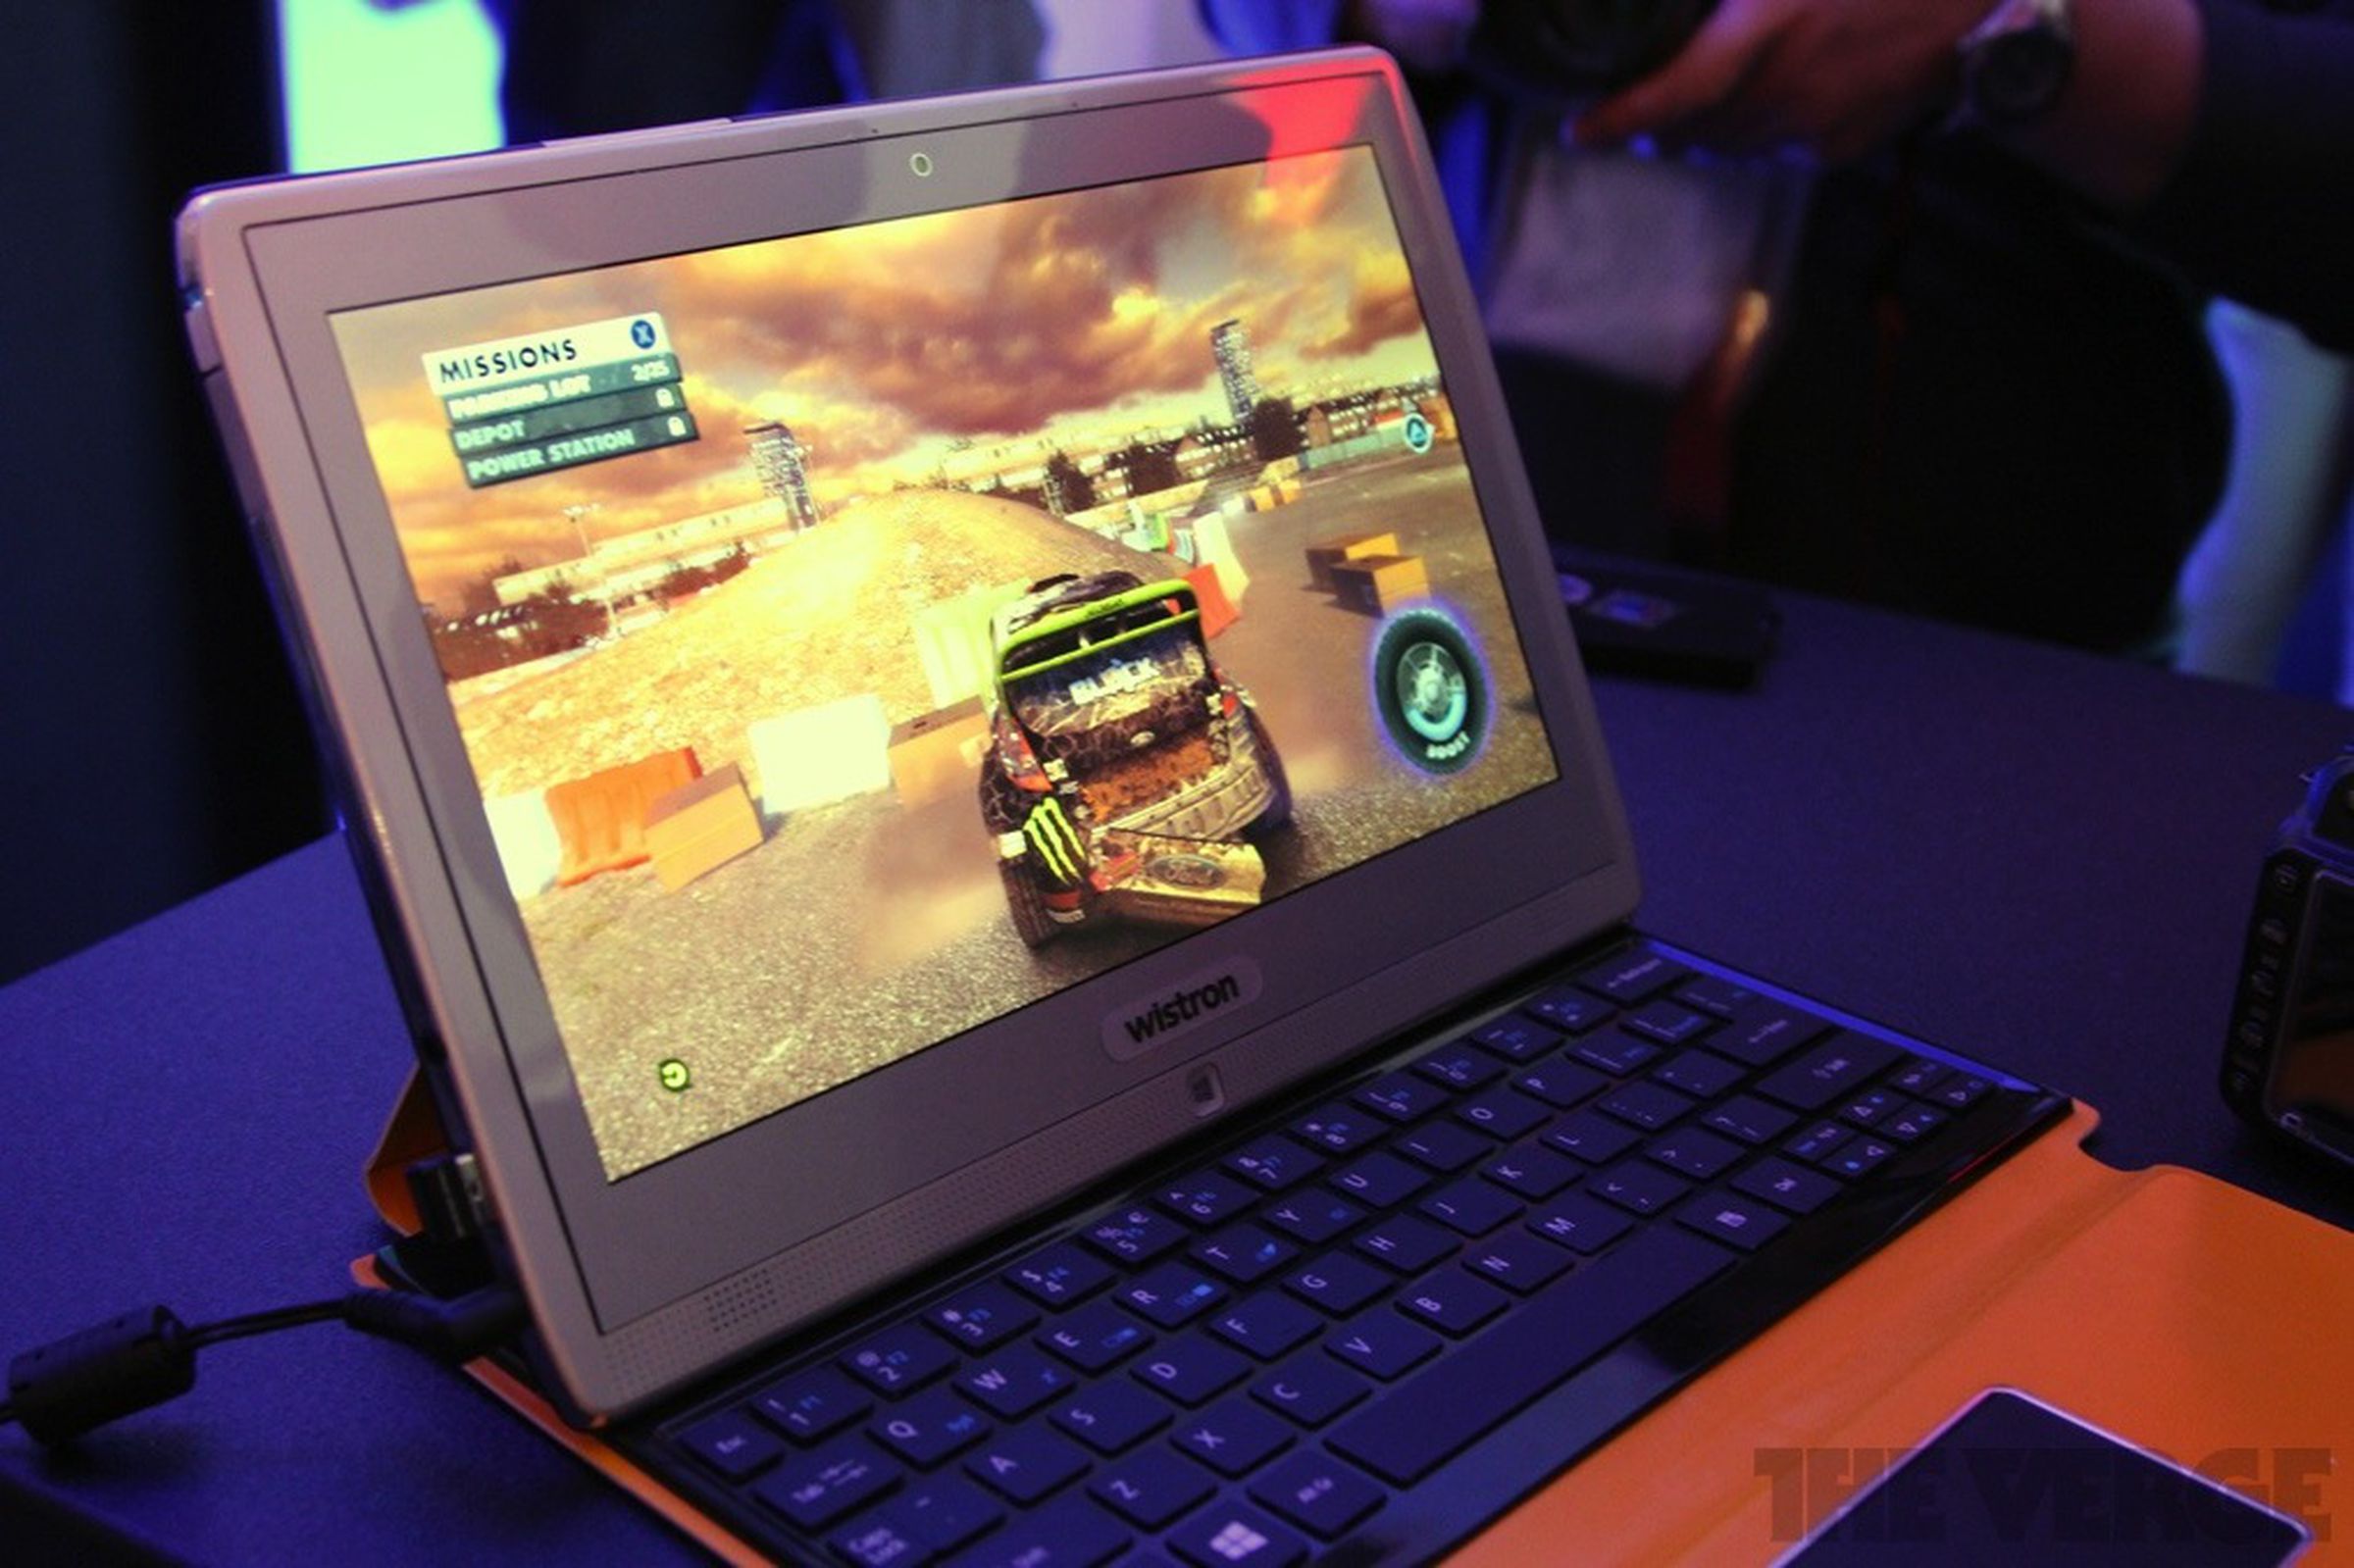 AMD Temash reference tablet hands-on pictures